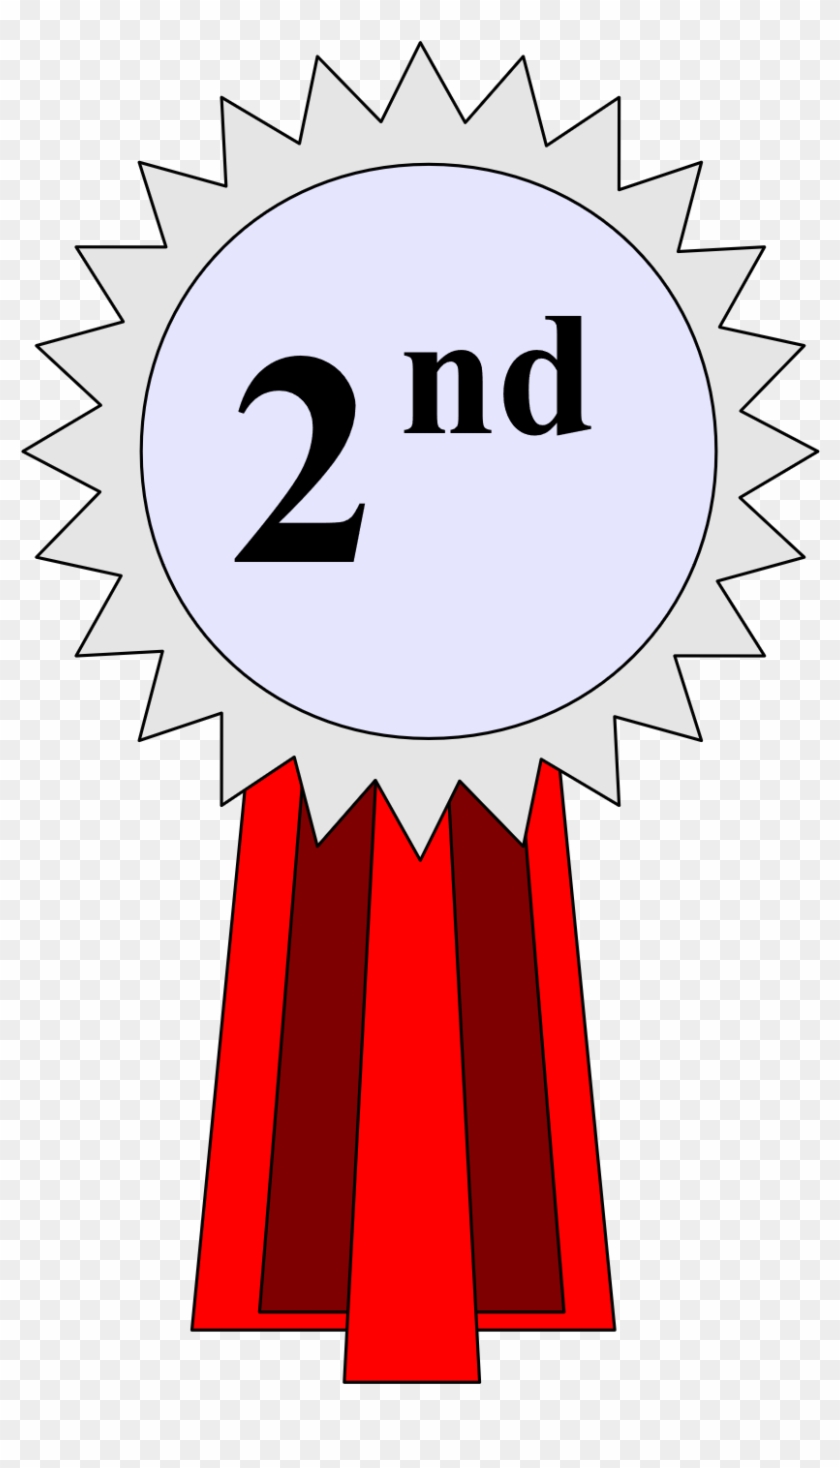 2nd Place Medal Clipart 2nd Place Ribbon Clip Art Free Transparent Png Clipart Images Download